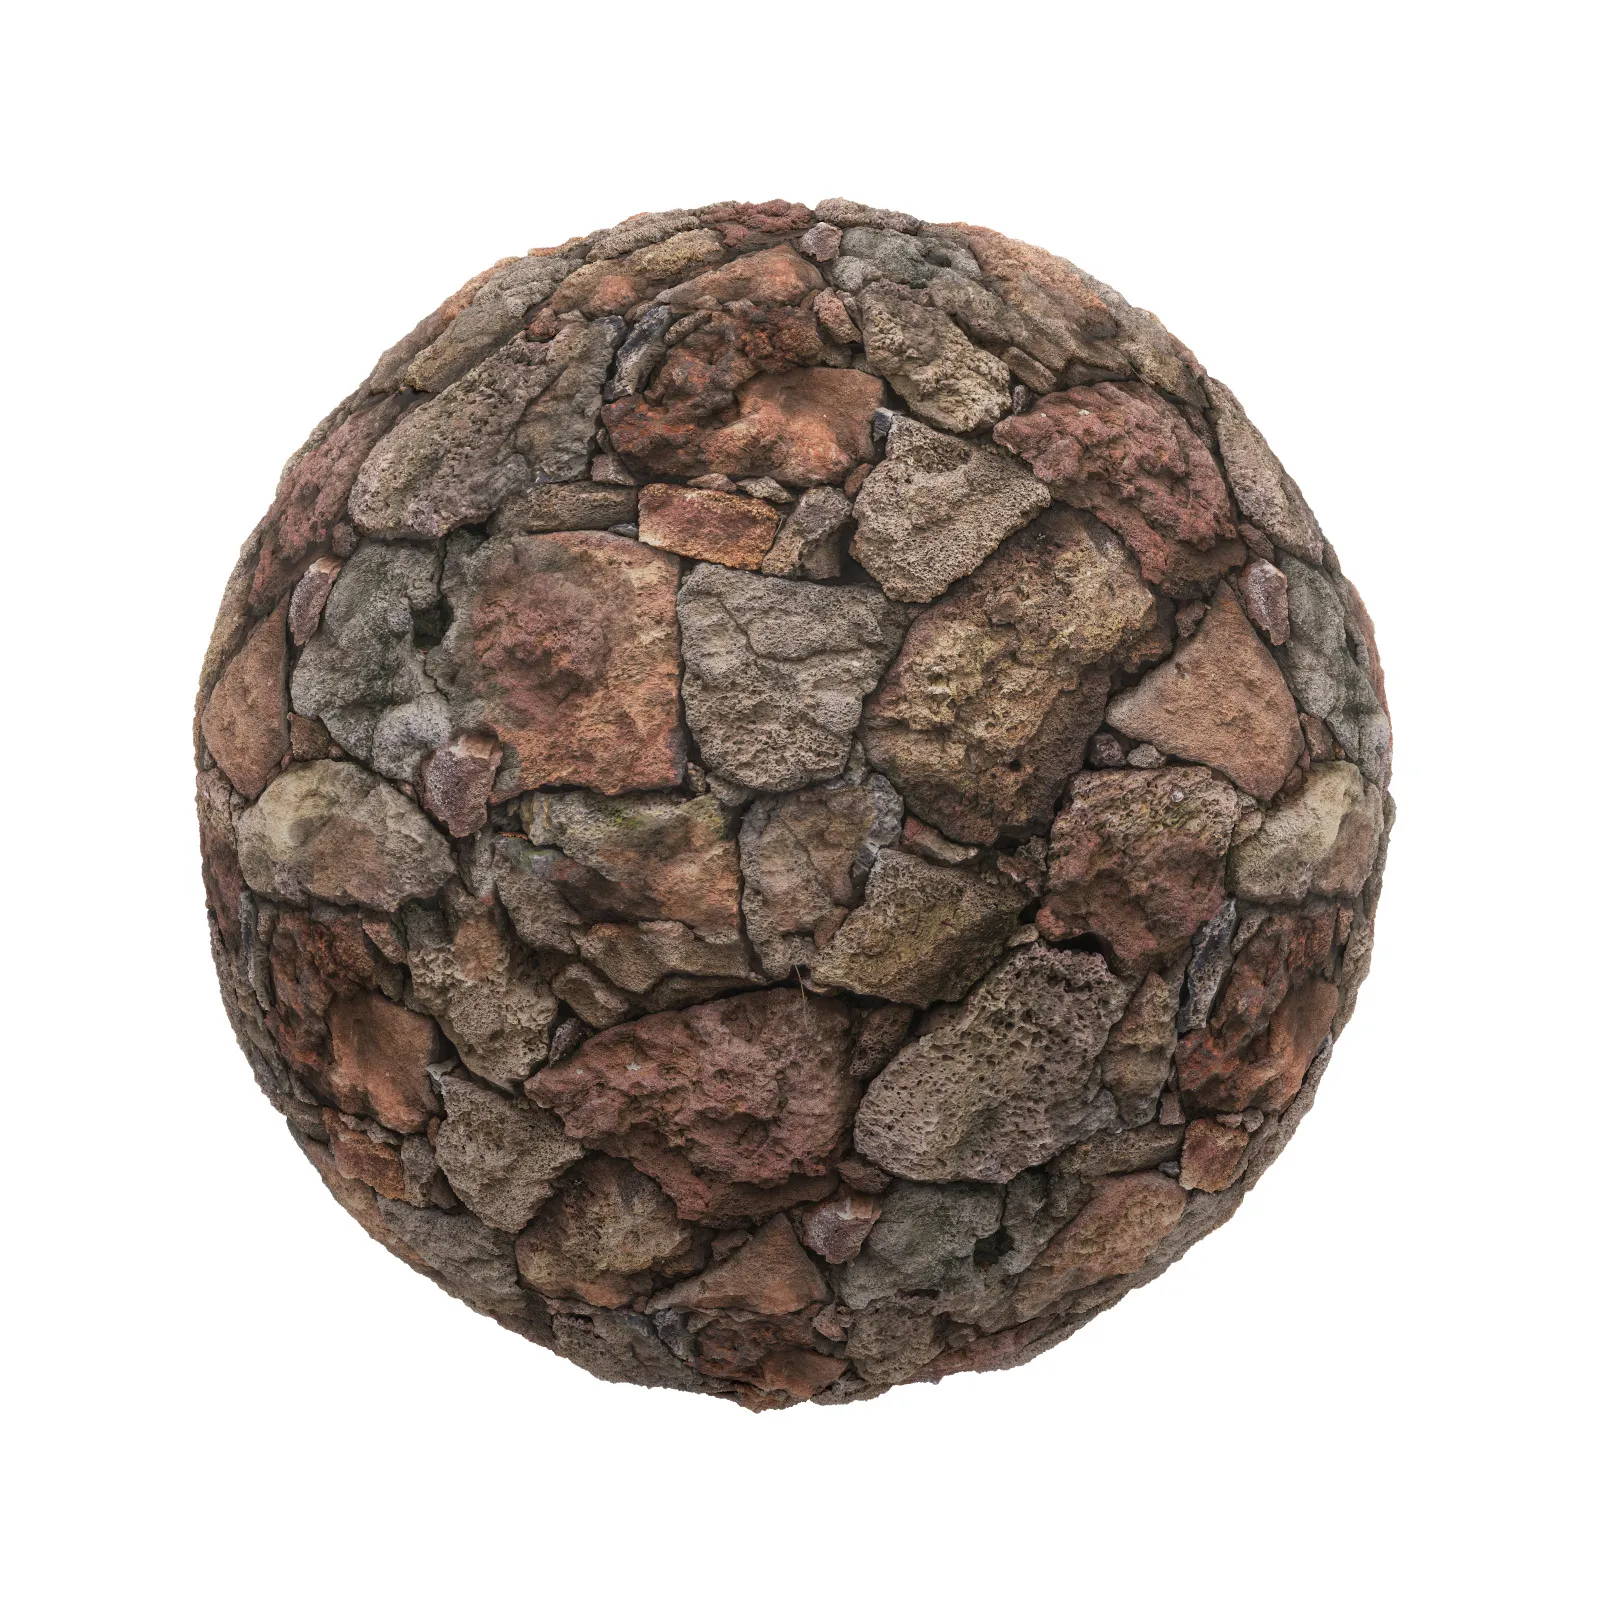 TEXTURES – STONES – CGAxis PBR Colection Vol 1 Stones – irregular stone pavement 4